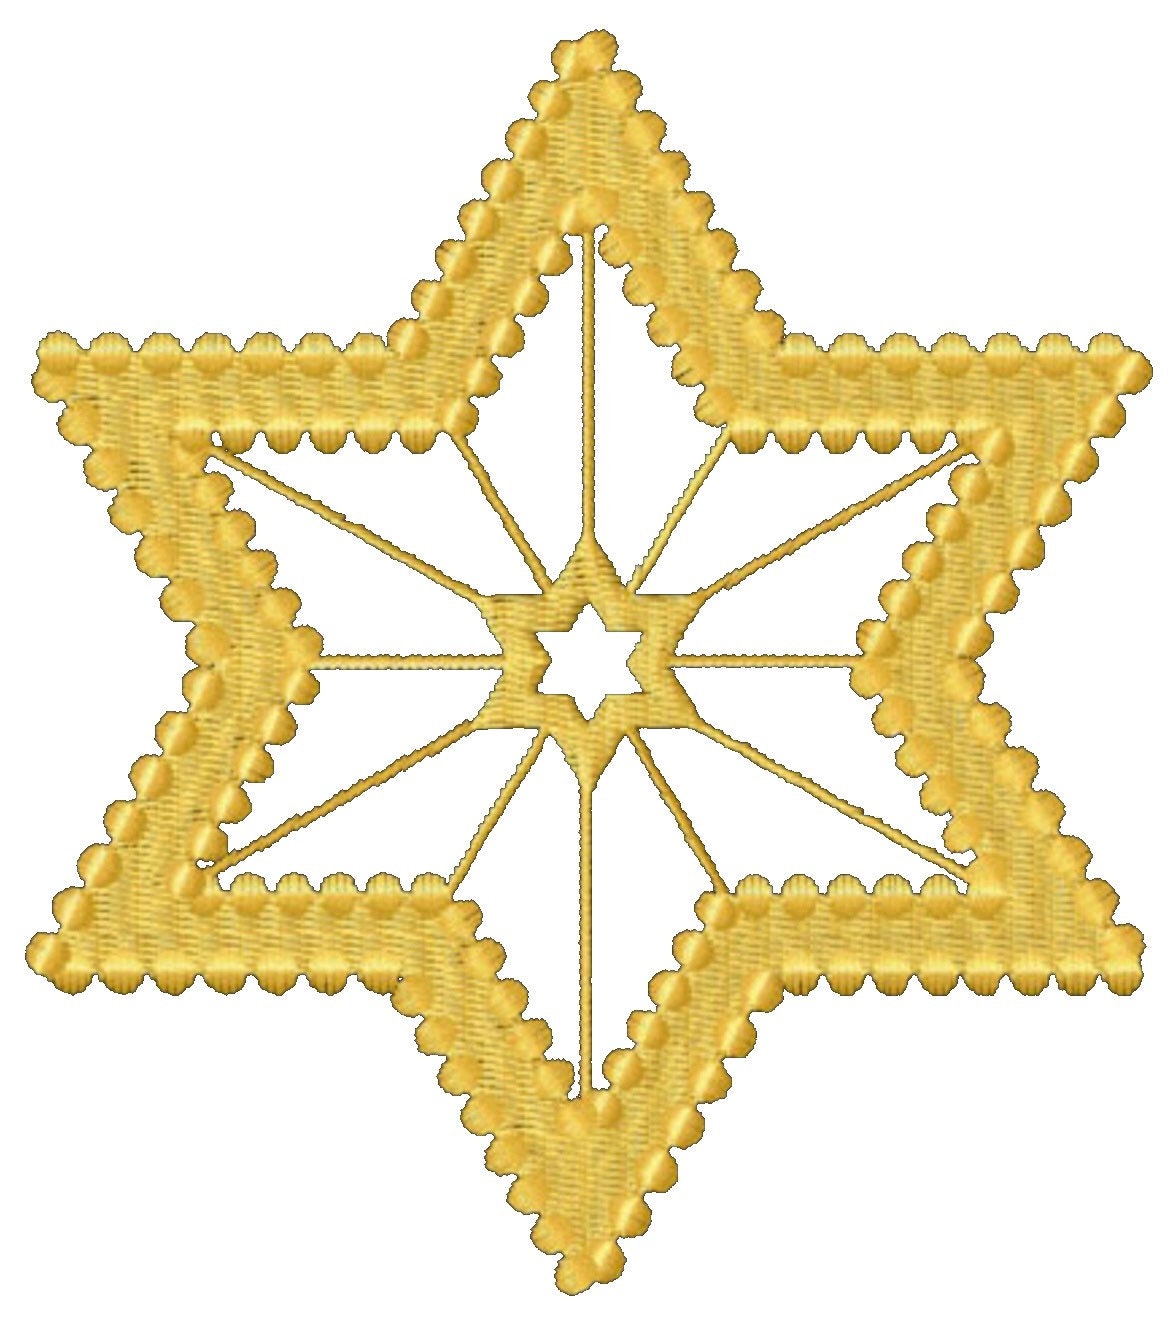 Embroidered Star of David Judaica Throw Pillow Cover. 18” x 18” Cotton pillow cover. Choice of 7 different Stars and 19 Pillow Colors